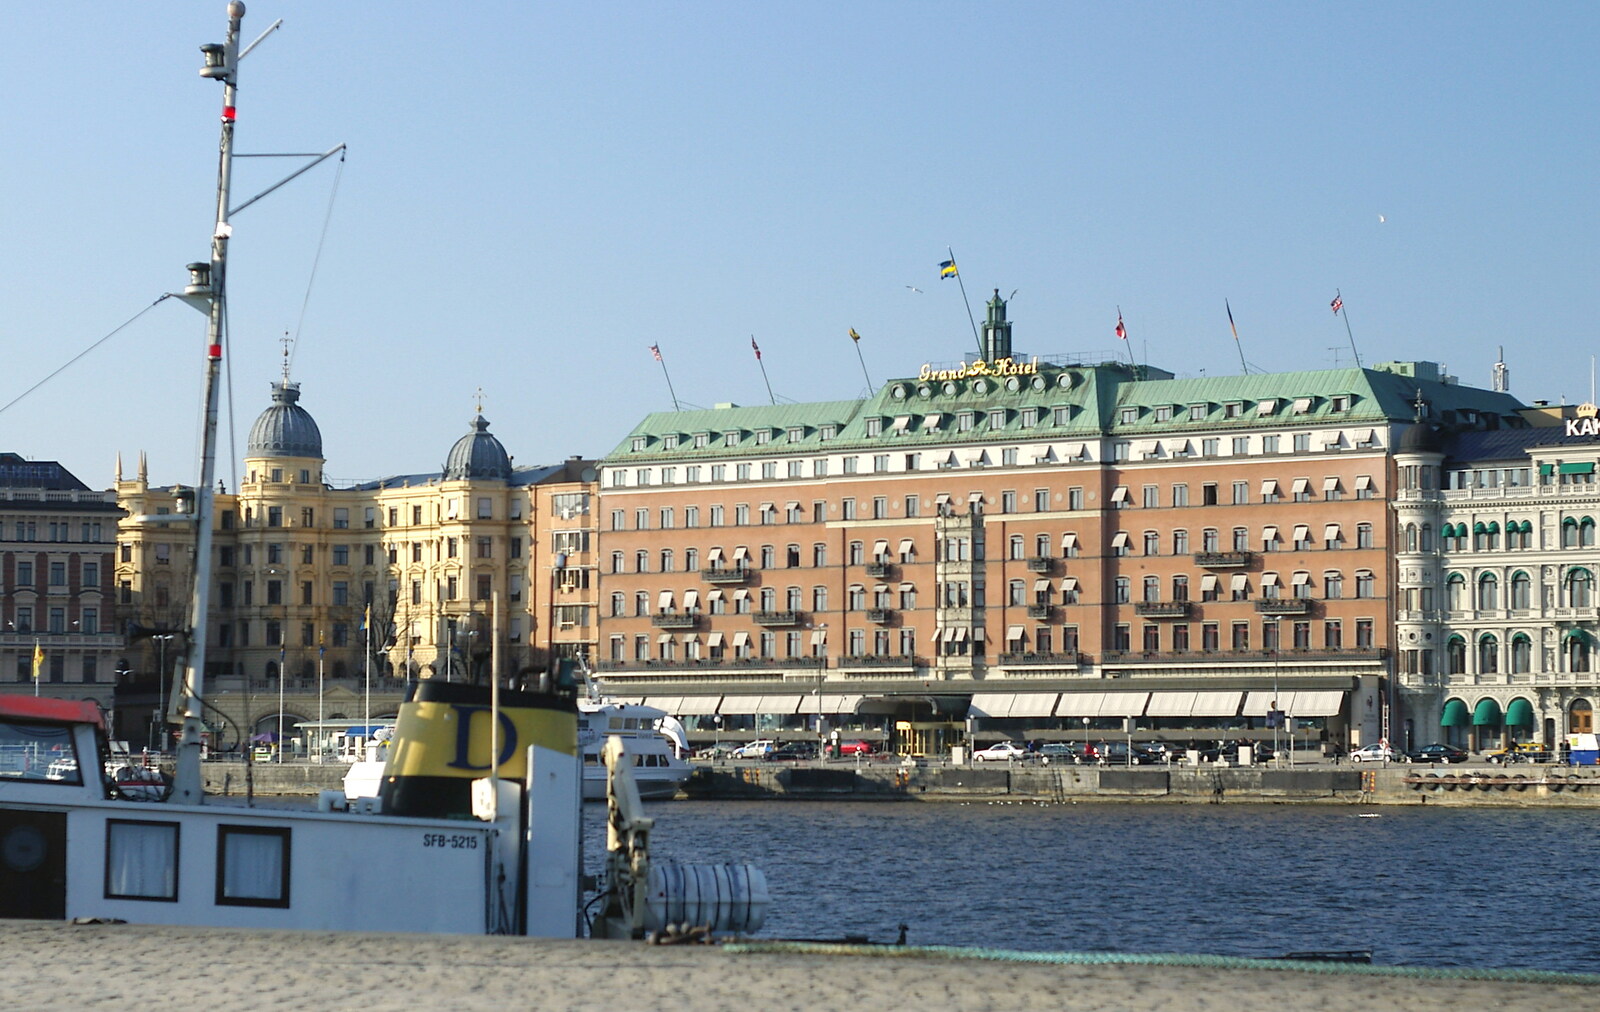 The waterfront and the Stockholm Grand Hotel from A Postcard From Stockholm: A Working Trip to Sweden - 24th April 2005